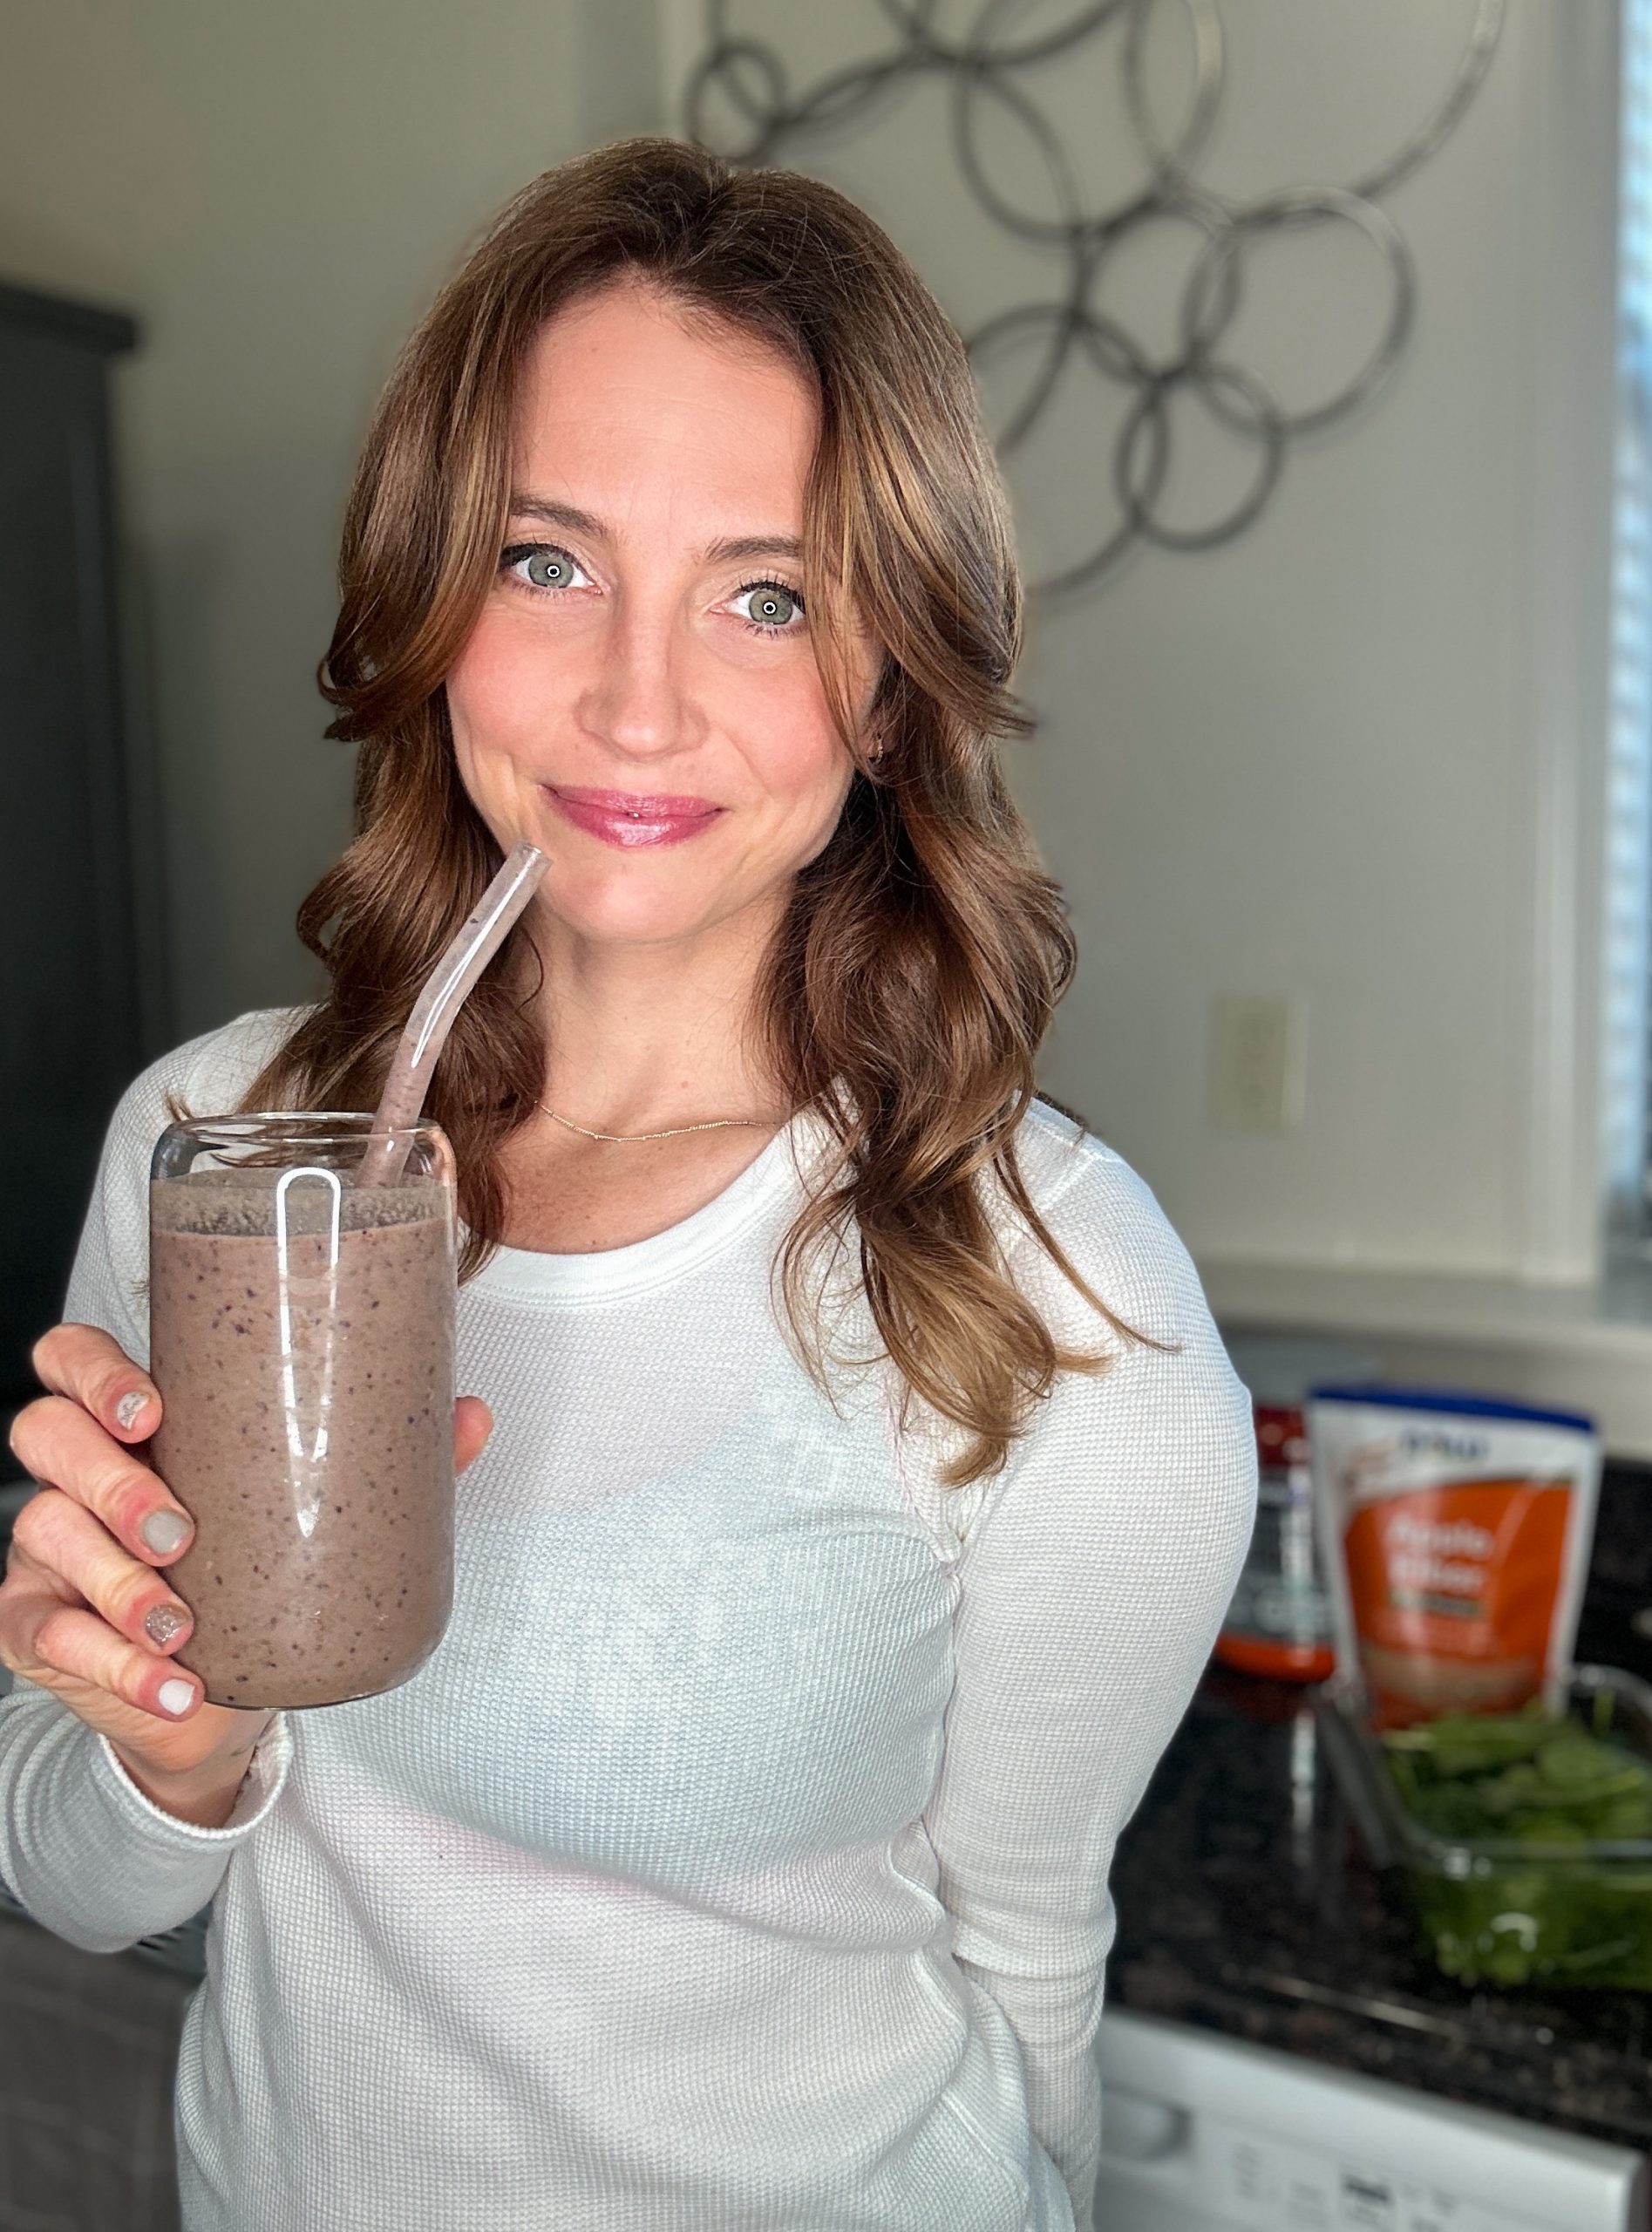 Heather smoothie - protein and fiber wellness tip